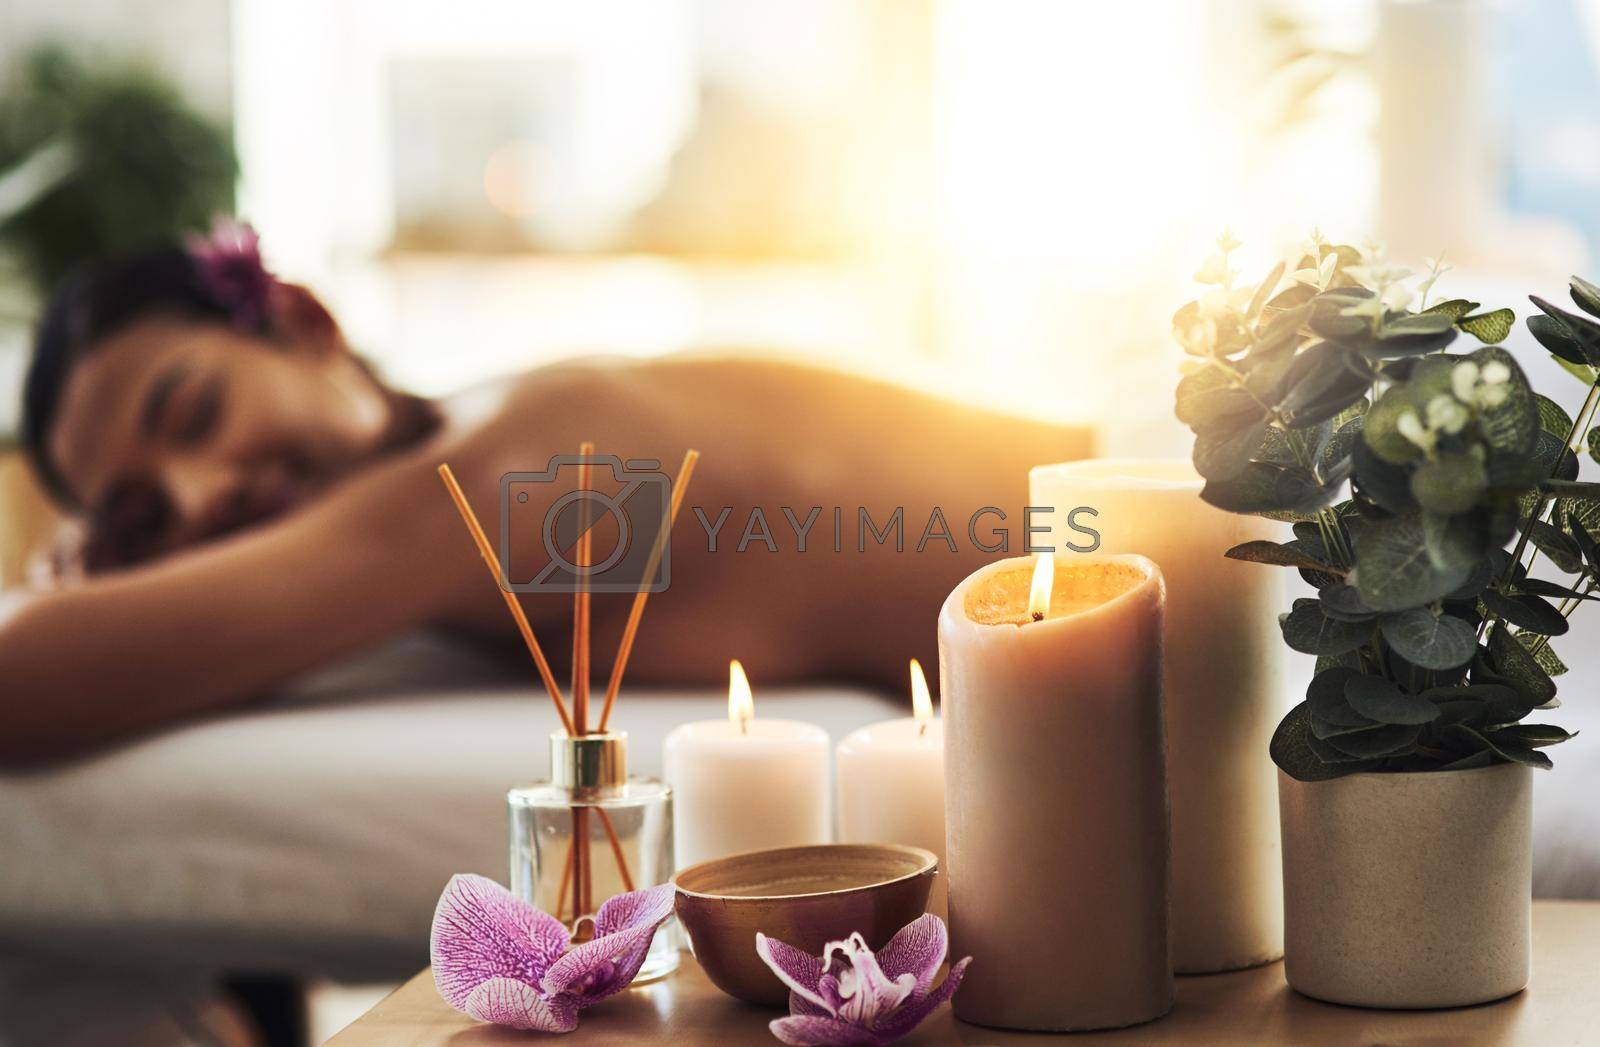 Shot of spa essentials on a table with a woman getting a massage in the background.